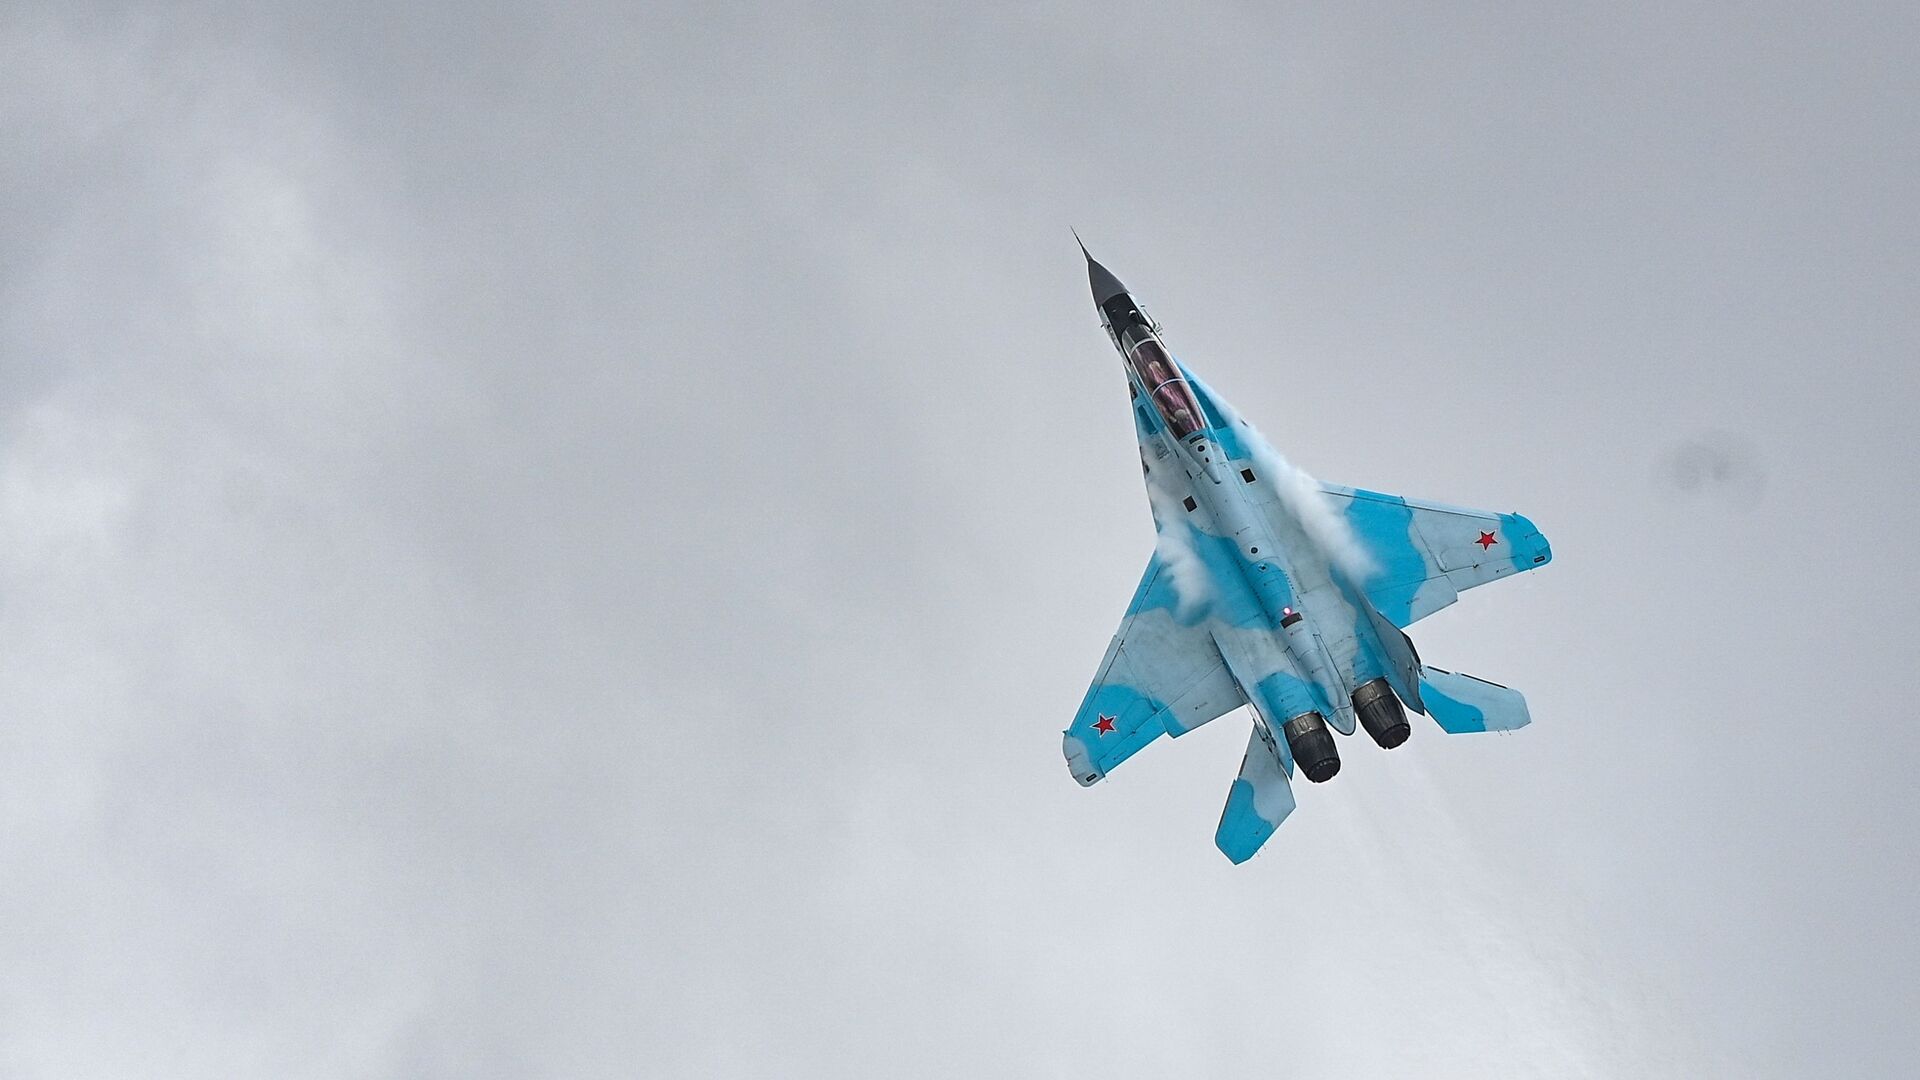 Upgraded Russian fourth-generation jet Su-35 NATO reporting names: Flanker-E) during MAKS-2021 air show - Sputnik International, 1920, 25.05.2023